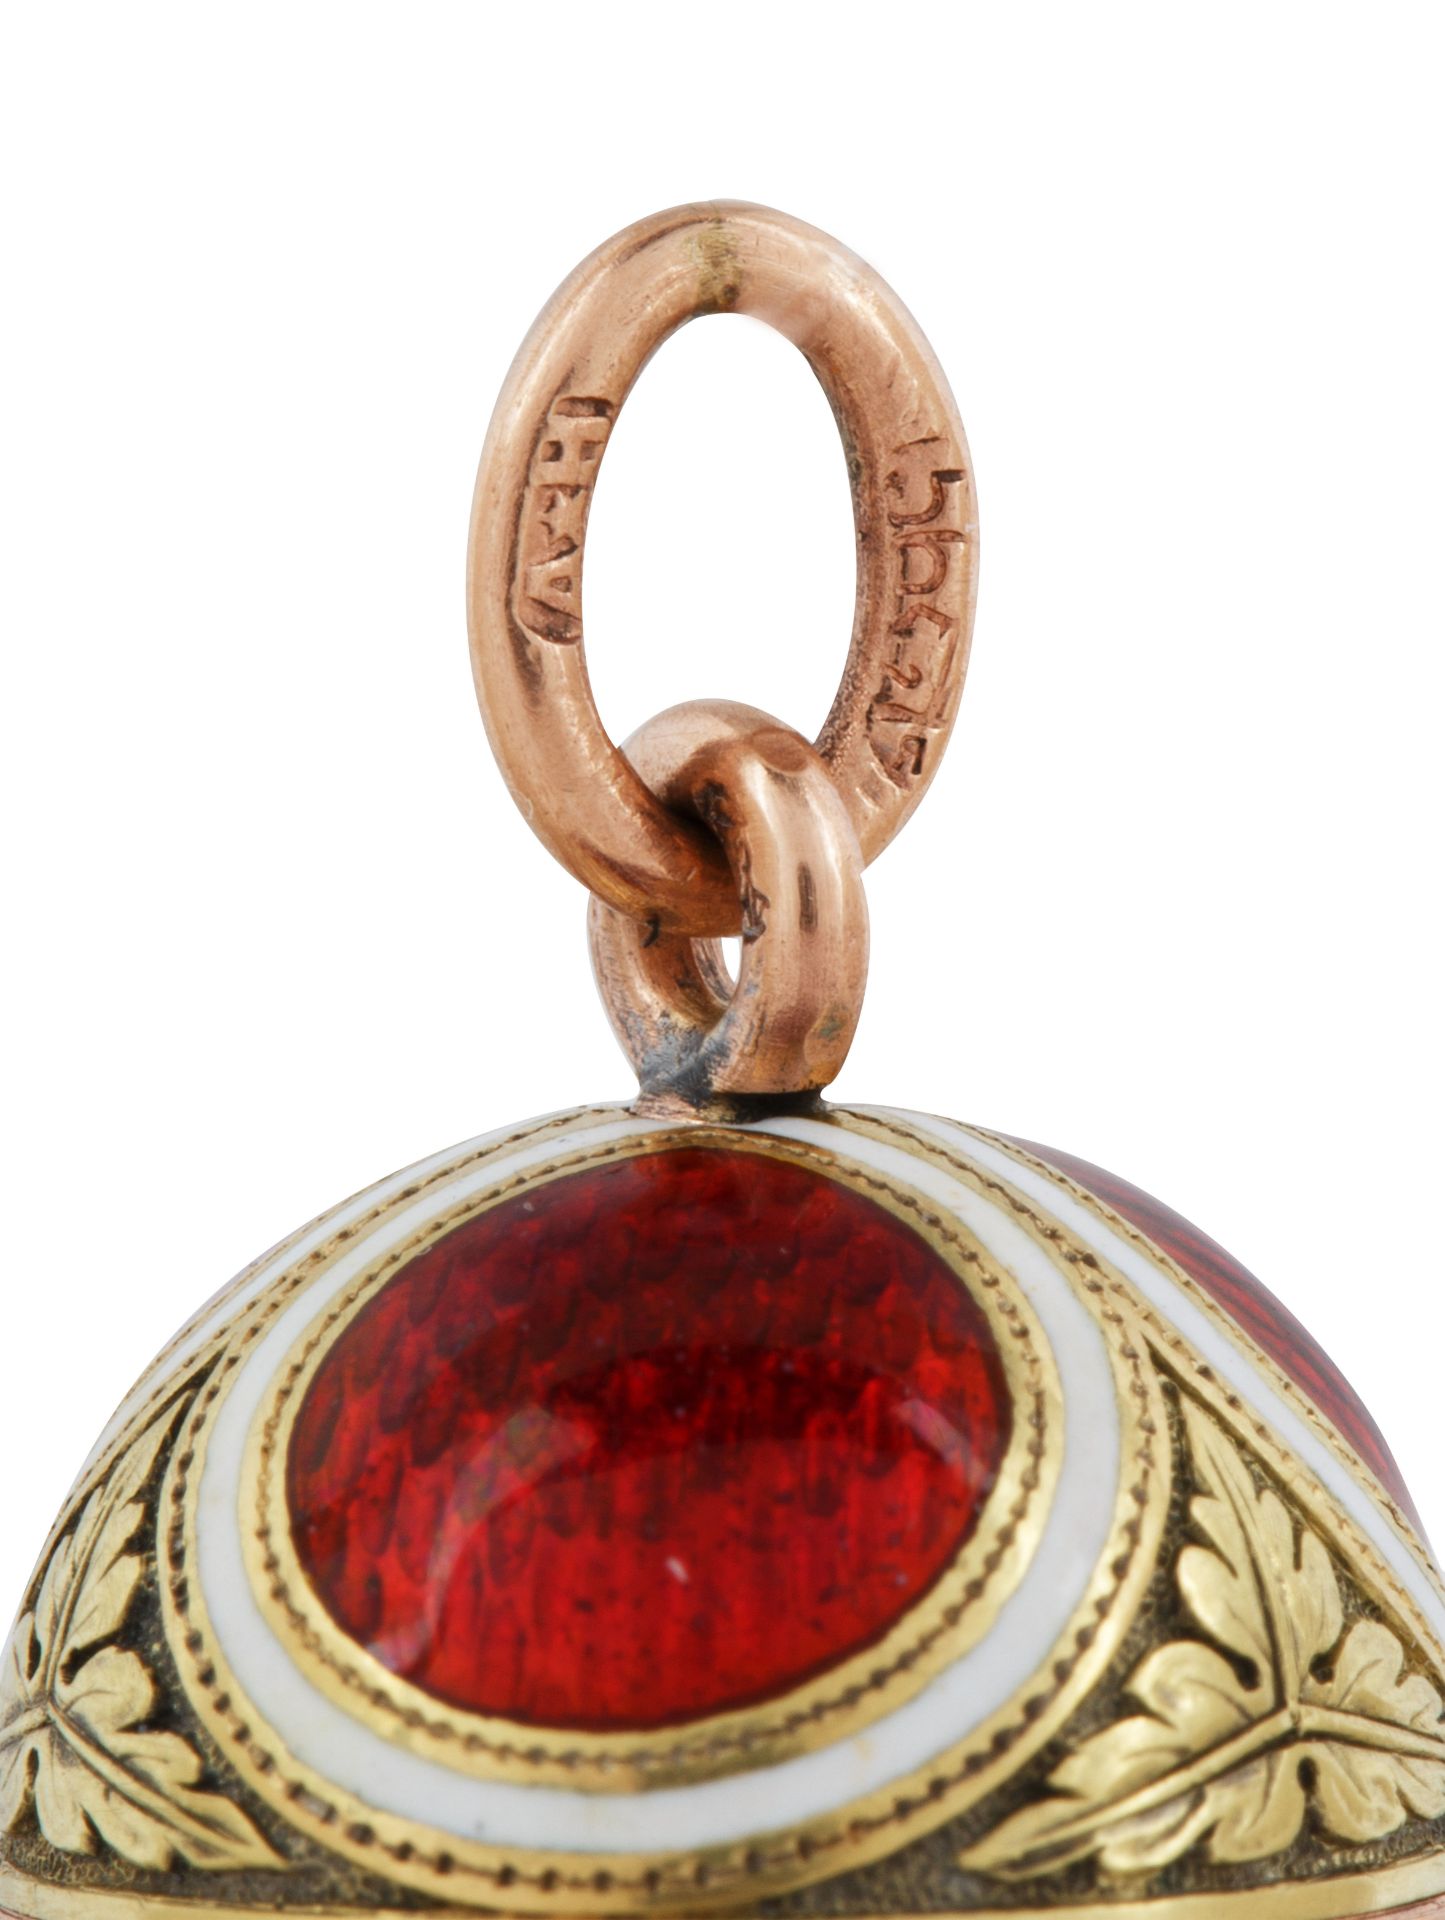 A 1908-1912 FABERGE AUGUST HOLLMING RUSSIAN GOLD, DIAMOND, MOONSTONE AND ENAMEL EGG PENDANT, ST. PET - Image 3 of 4